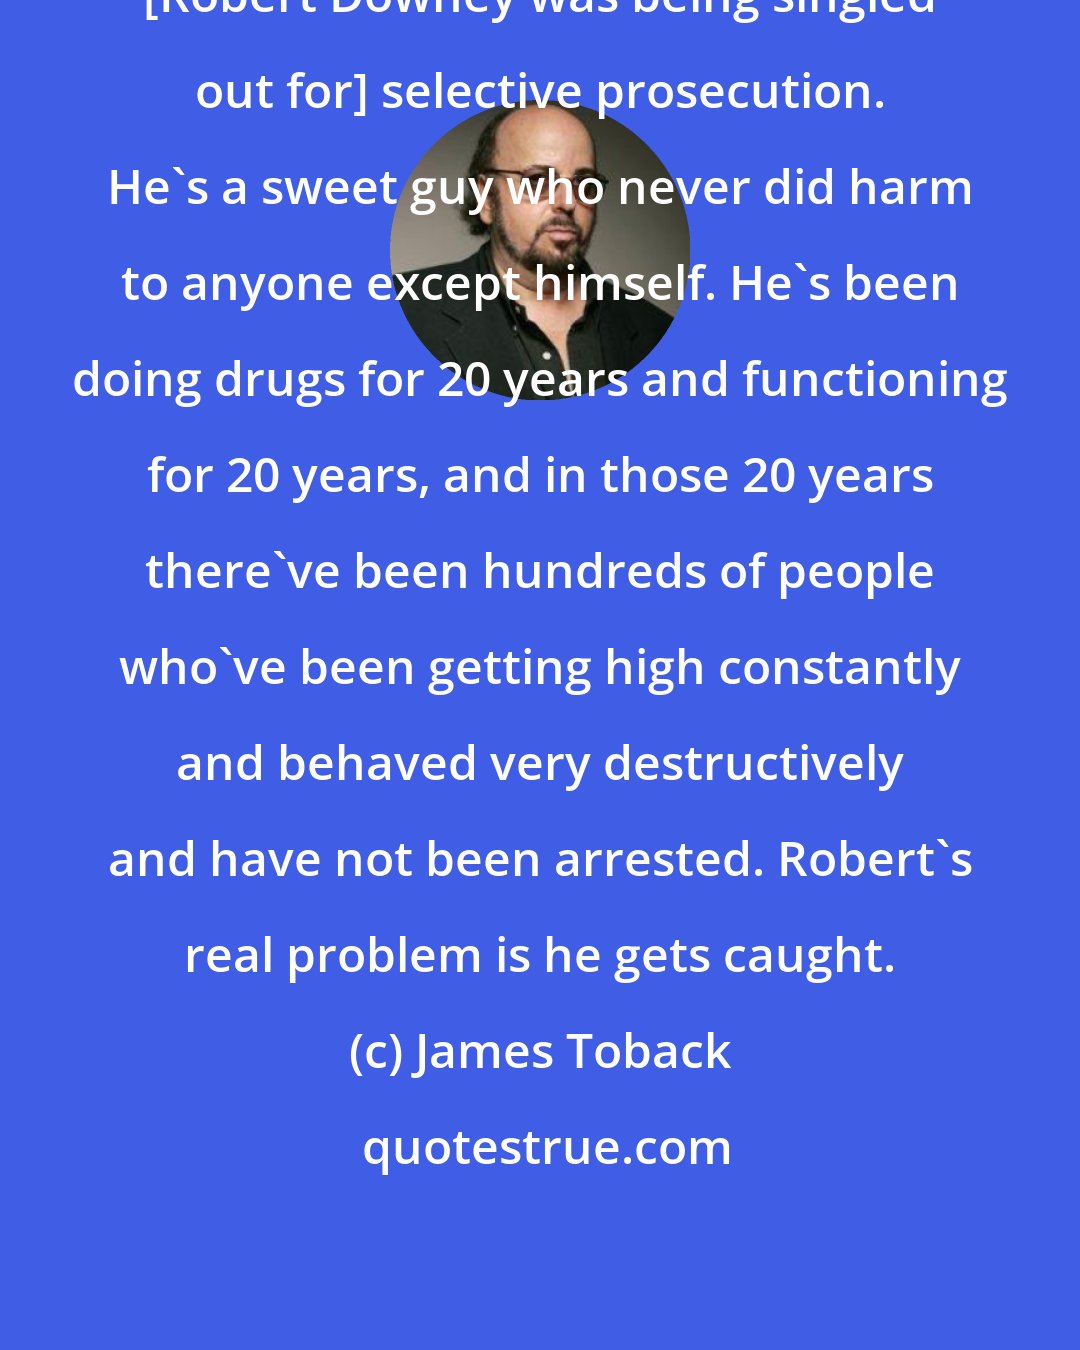 James Toback: [Robert Downey was being singled out for] selective prosecution. He's a sweet guy who never did harm to anyone except himself. He's been doing drugs for 20 years and functioning for 20 years, and in those 20 years there've been hundreds of people who've been getting high constantly and behaved very destructively and have not been arrested. Robert's real problem is he gets caught.